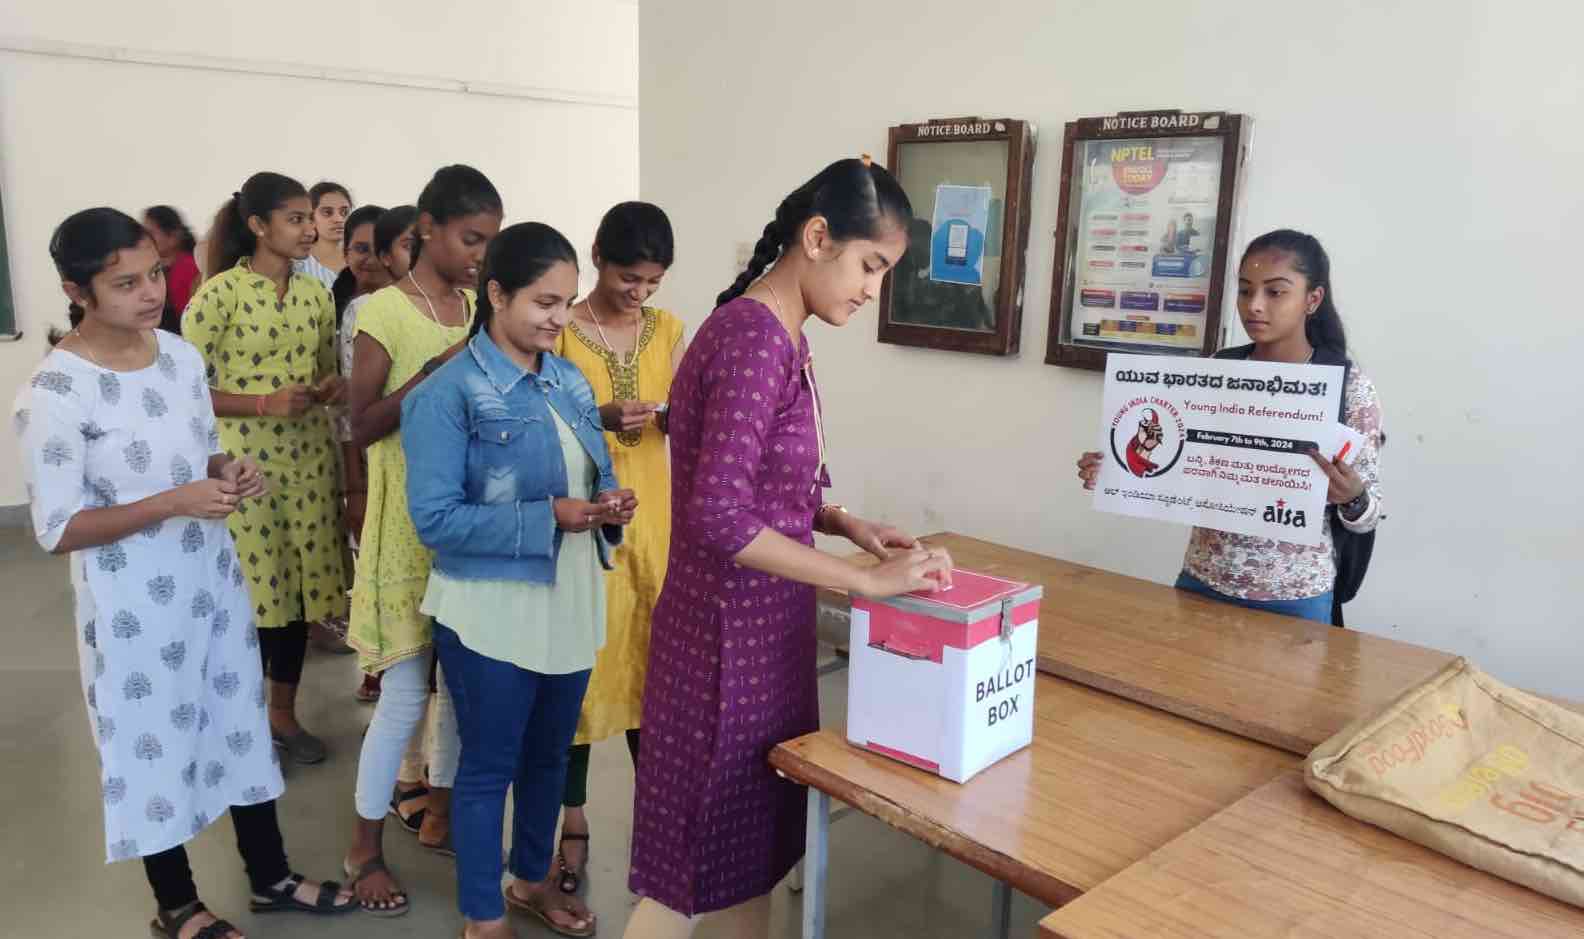 Young India Referendum 2024 Evokes Enthusiastic Response Across the Country